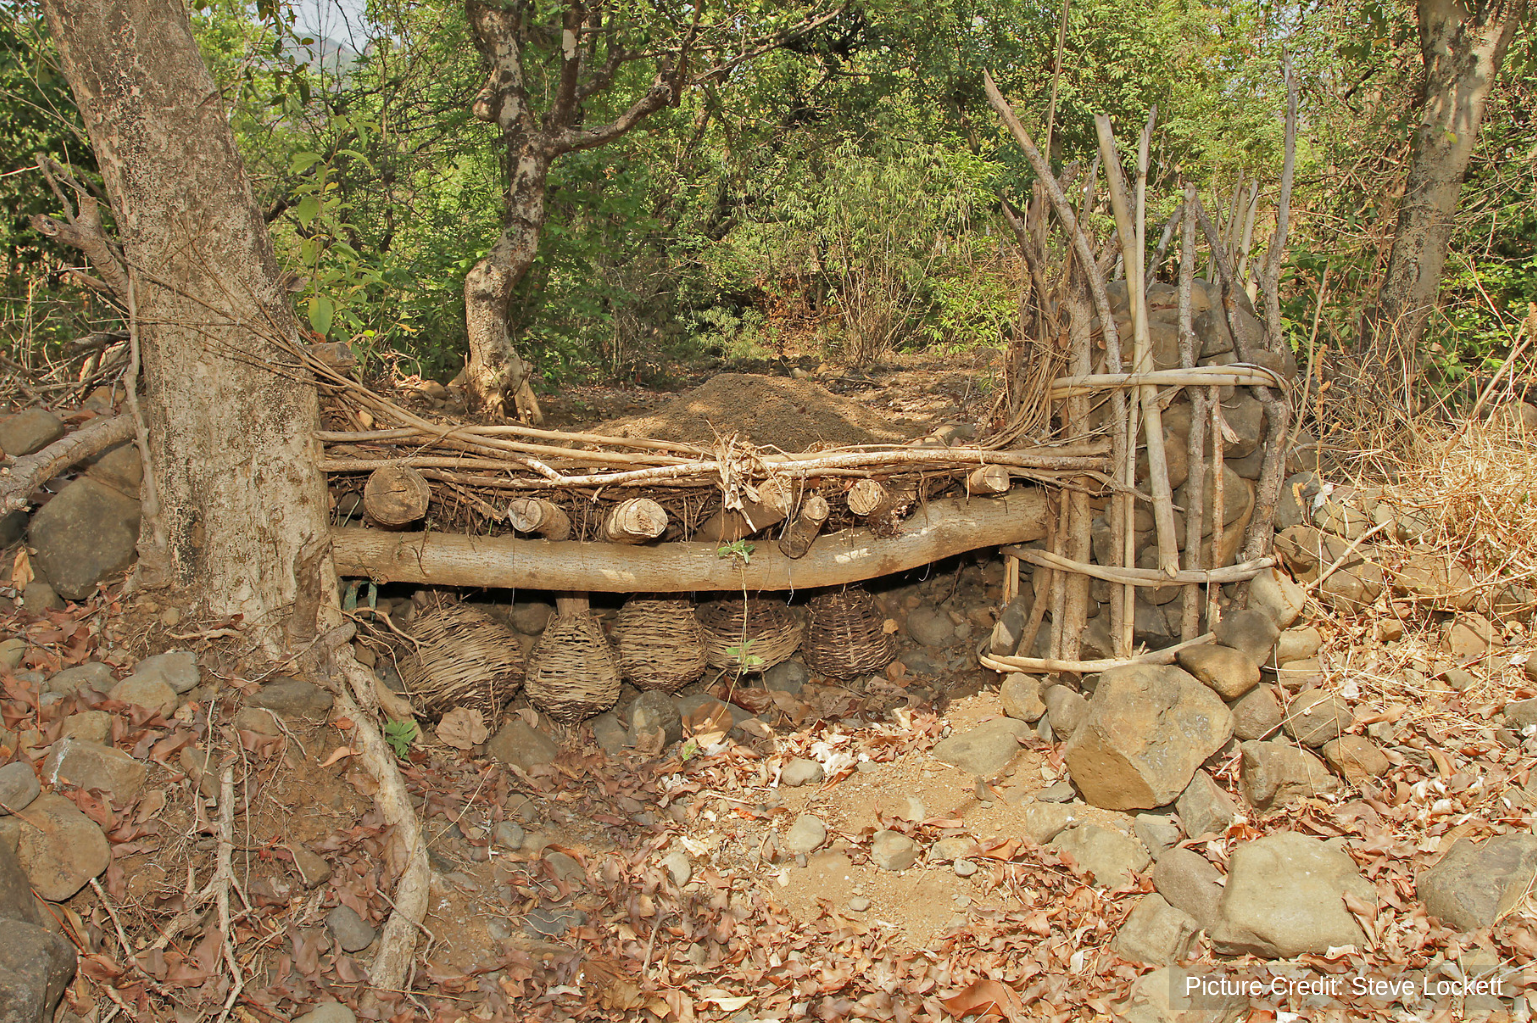  A selective and sustainable fishing trap buried in the substrate of a tributary in India 